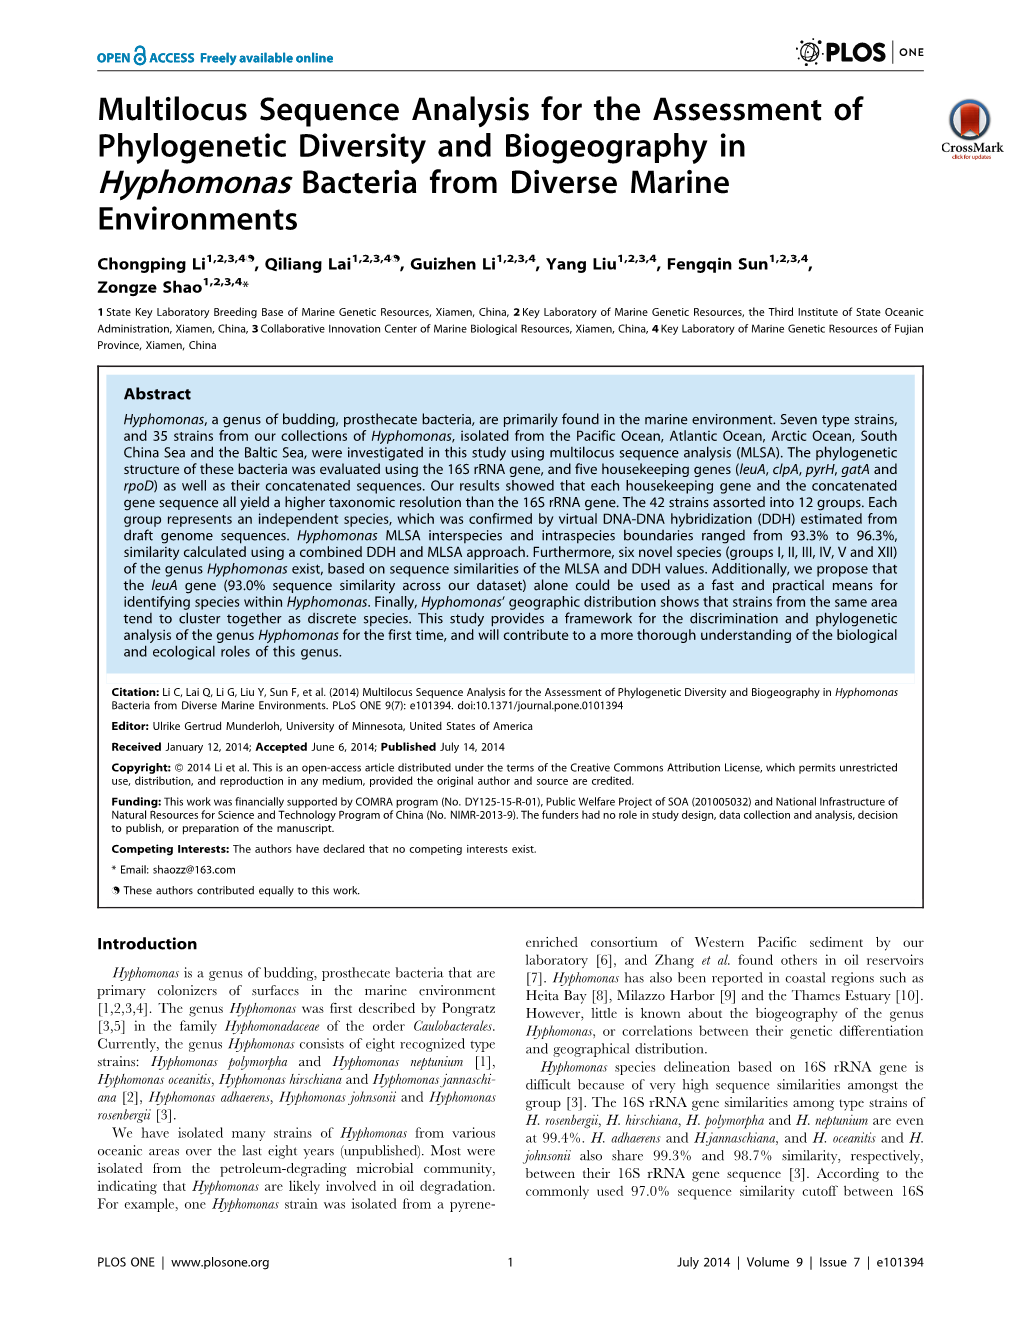 Multilocus Sequence Analysis for the Assessment of Phylogenetic Diversity and Biogeography in Hyphomonas Bacteria from Diverse Marine Environments